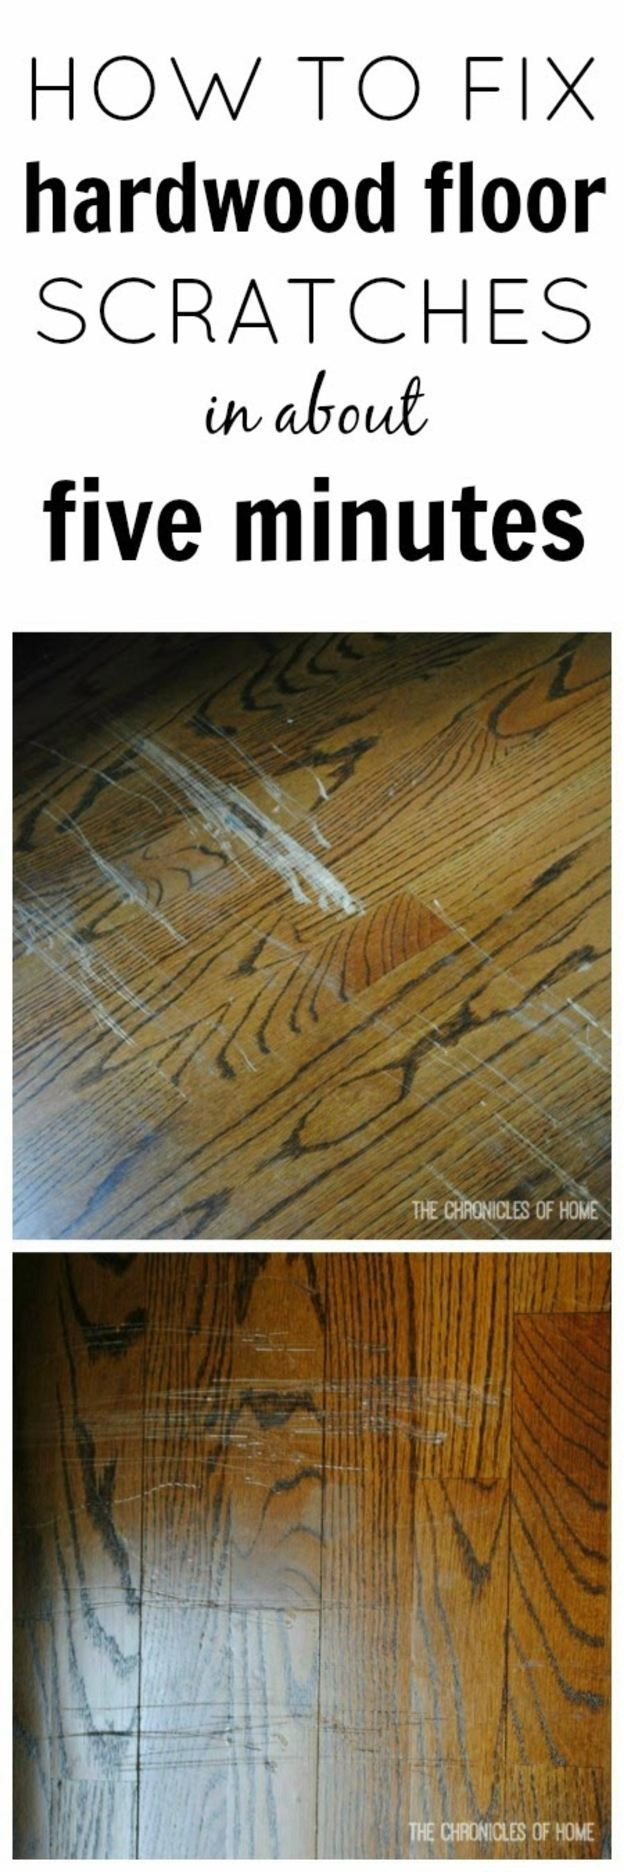 16 Perfect Hardwood Floor Refinishing Cary Nc 2024 free download hardwood floor refinishing cary nc of 211 best cleaning natural cleaners images on pinterest cleaning with regard to fix scratched hardwood floors in about five minutes